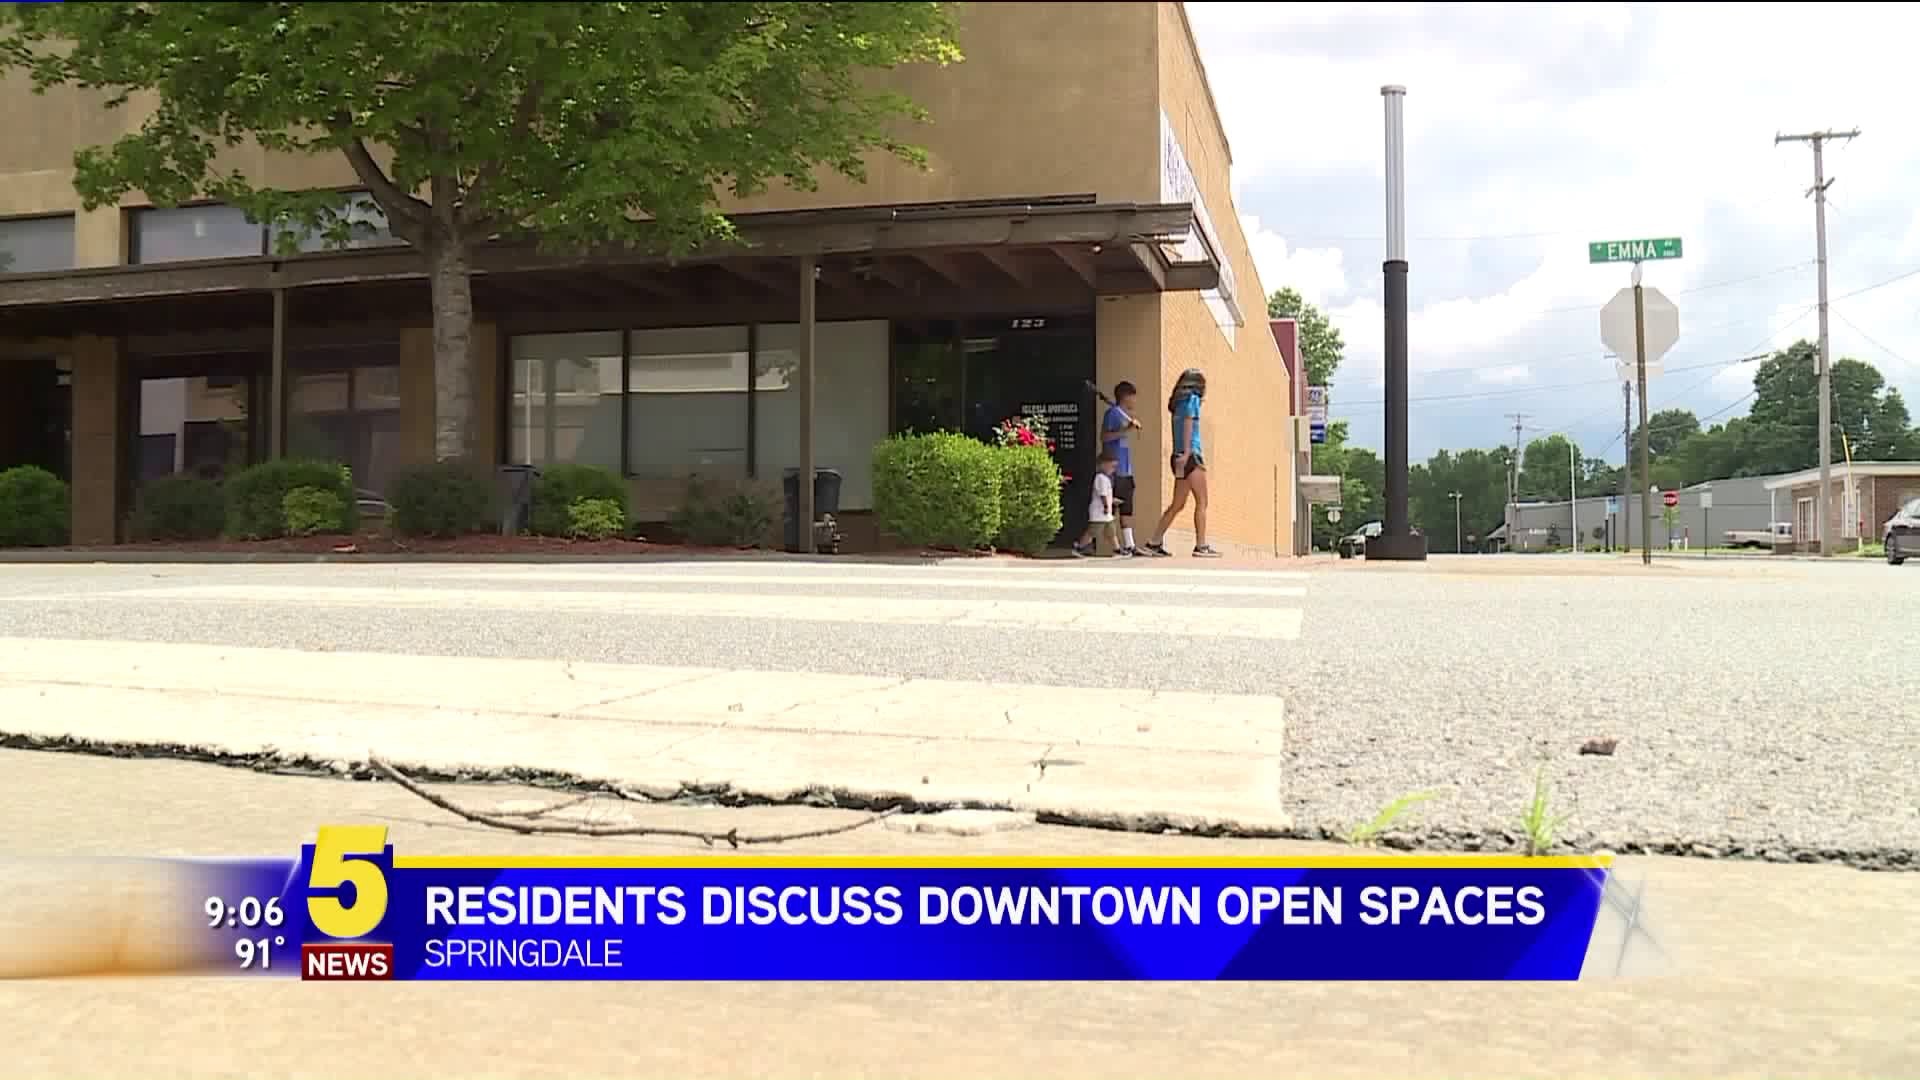 Residents Discuss Downtown Open Spaces